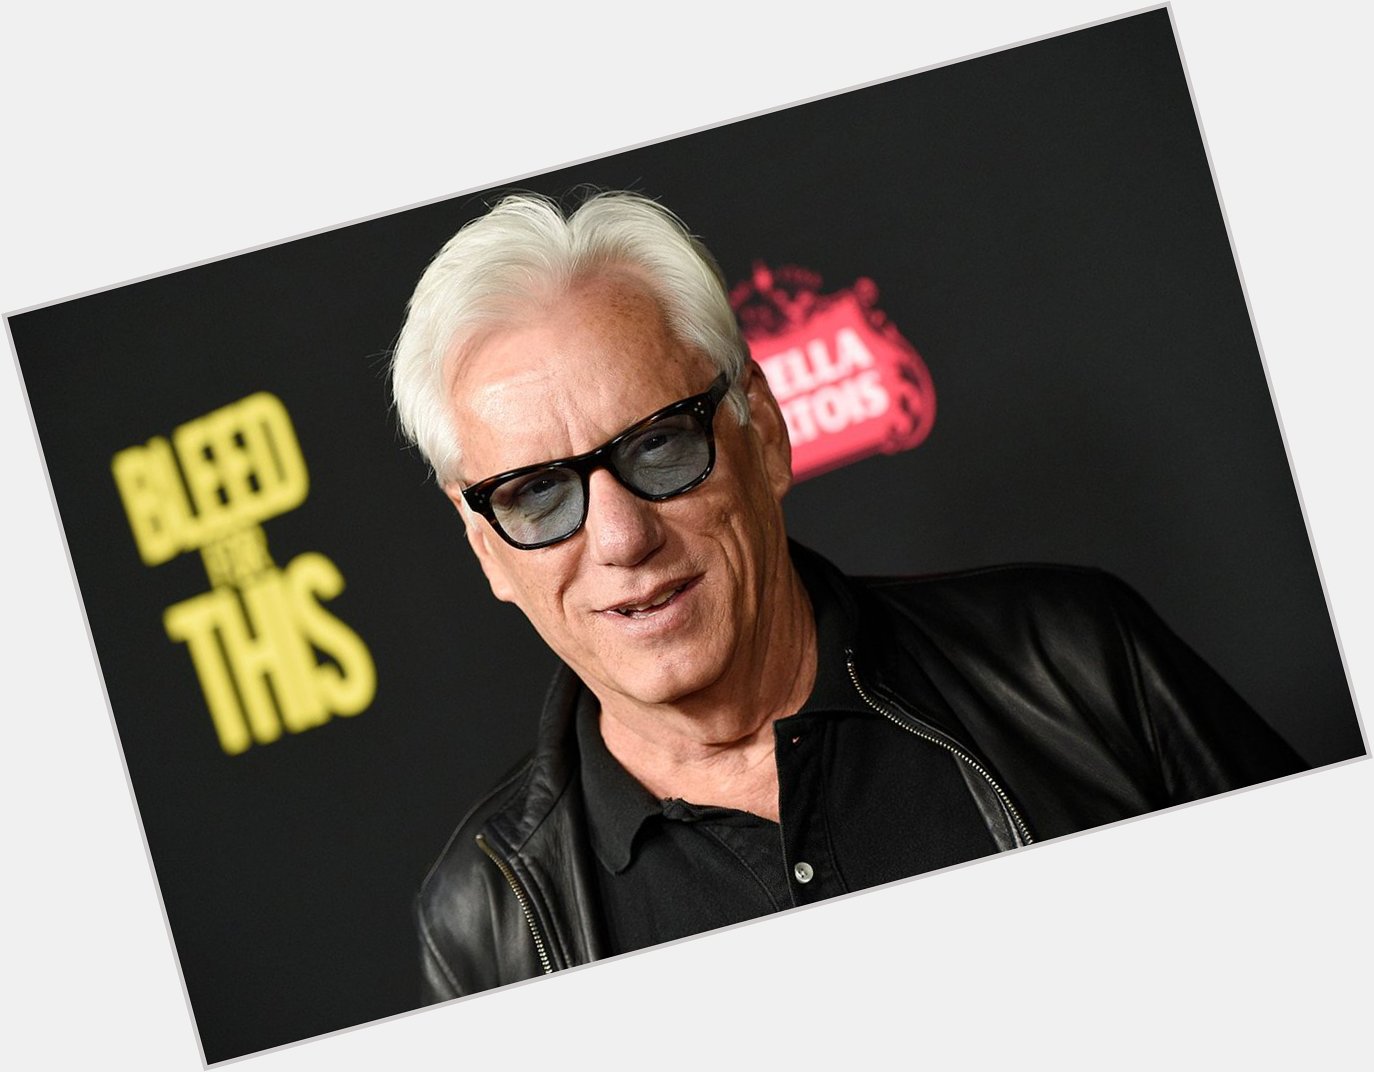 Happy Birthday to actor James Woods! He turns 70 today.
Favorite movie? -  